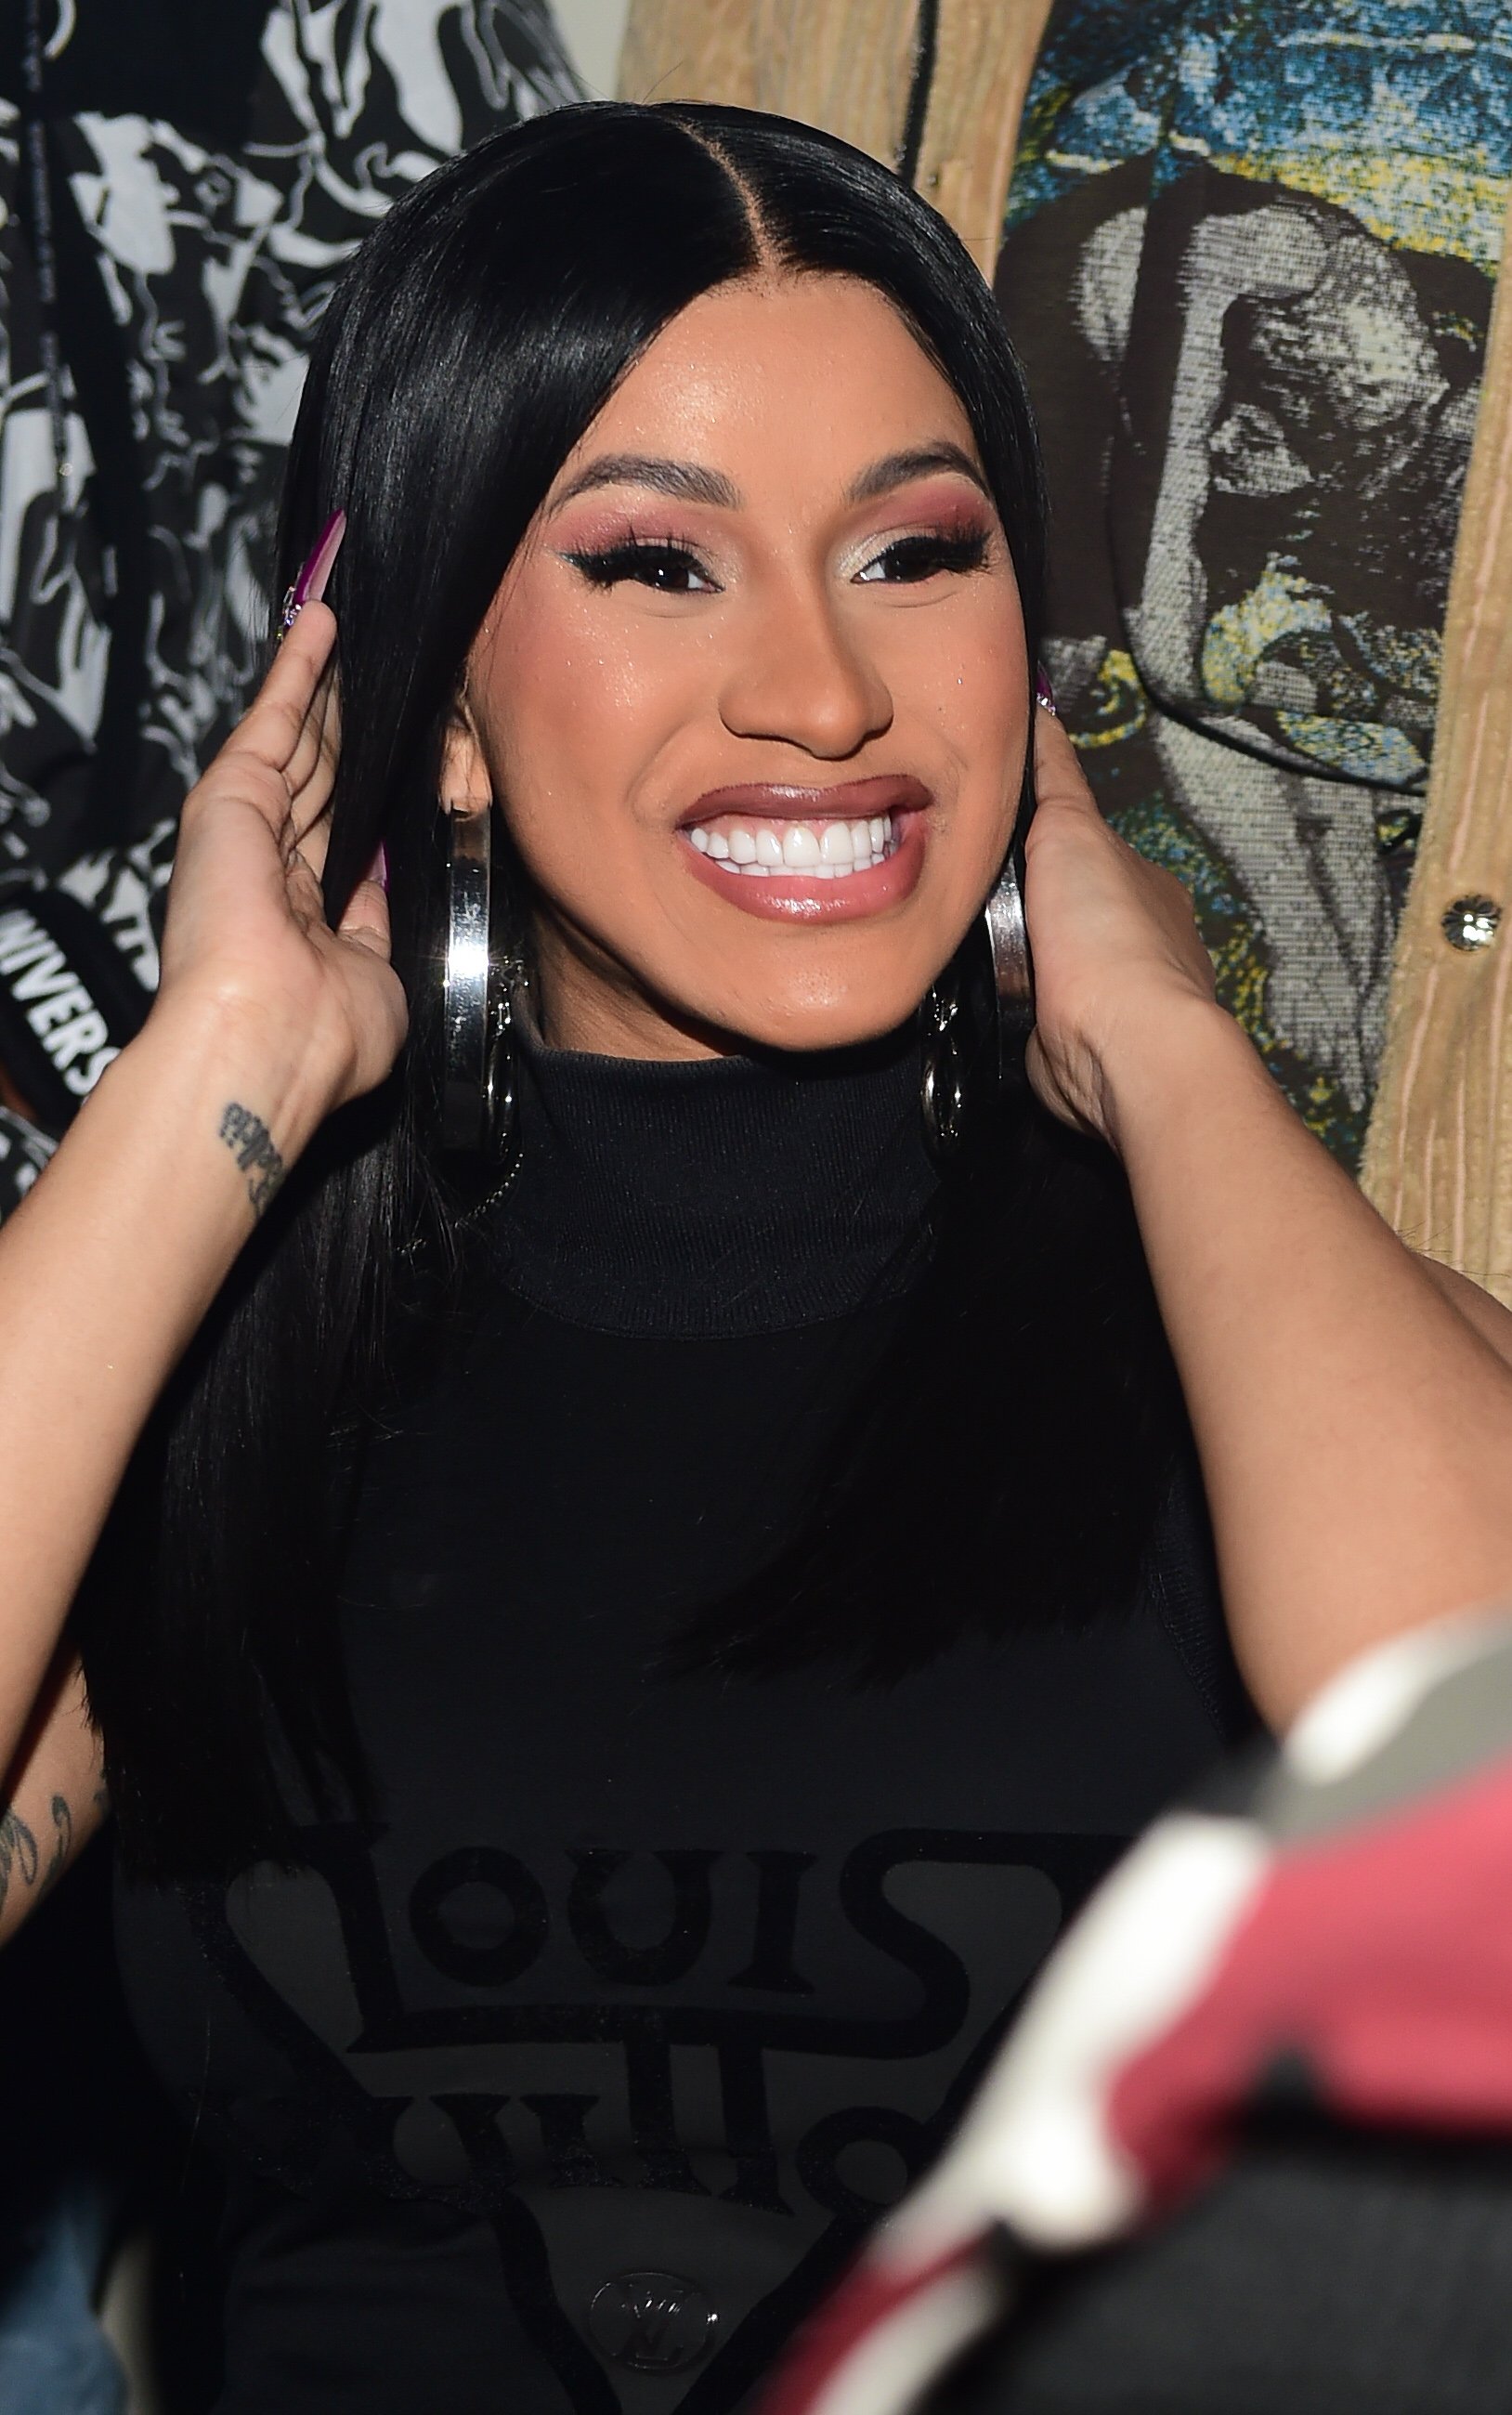 Cardi B attends the Hawks vs Nets after-party at Gold Room in Atlanta, Georgia on February 28, 2020 | Photo: Getty Images